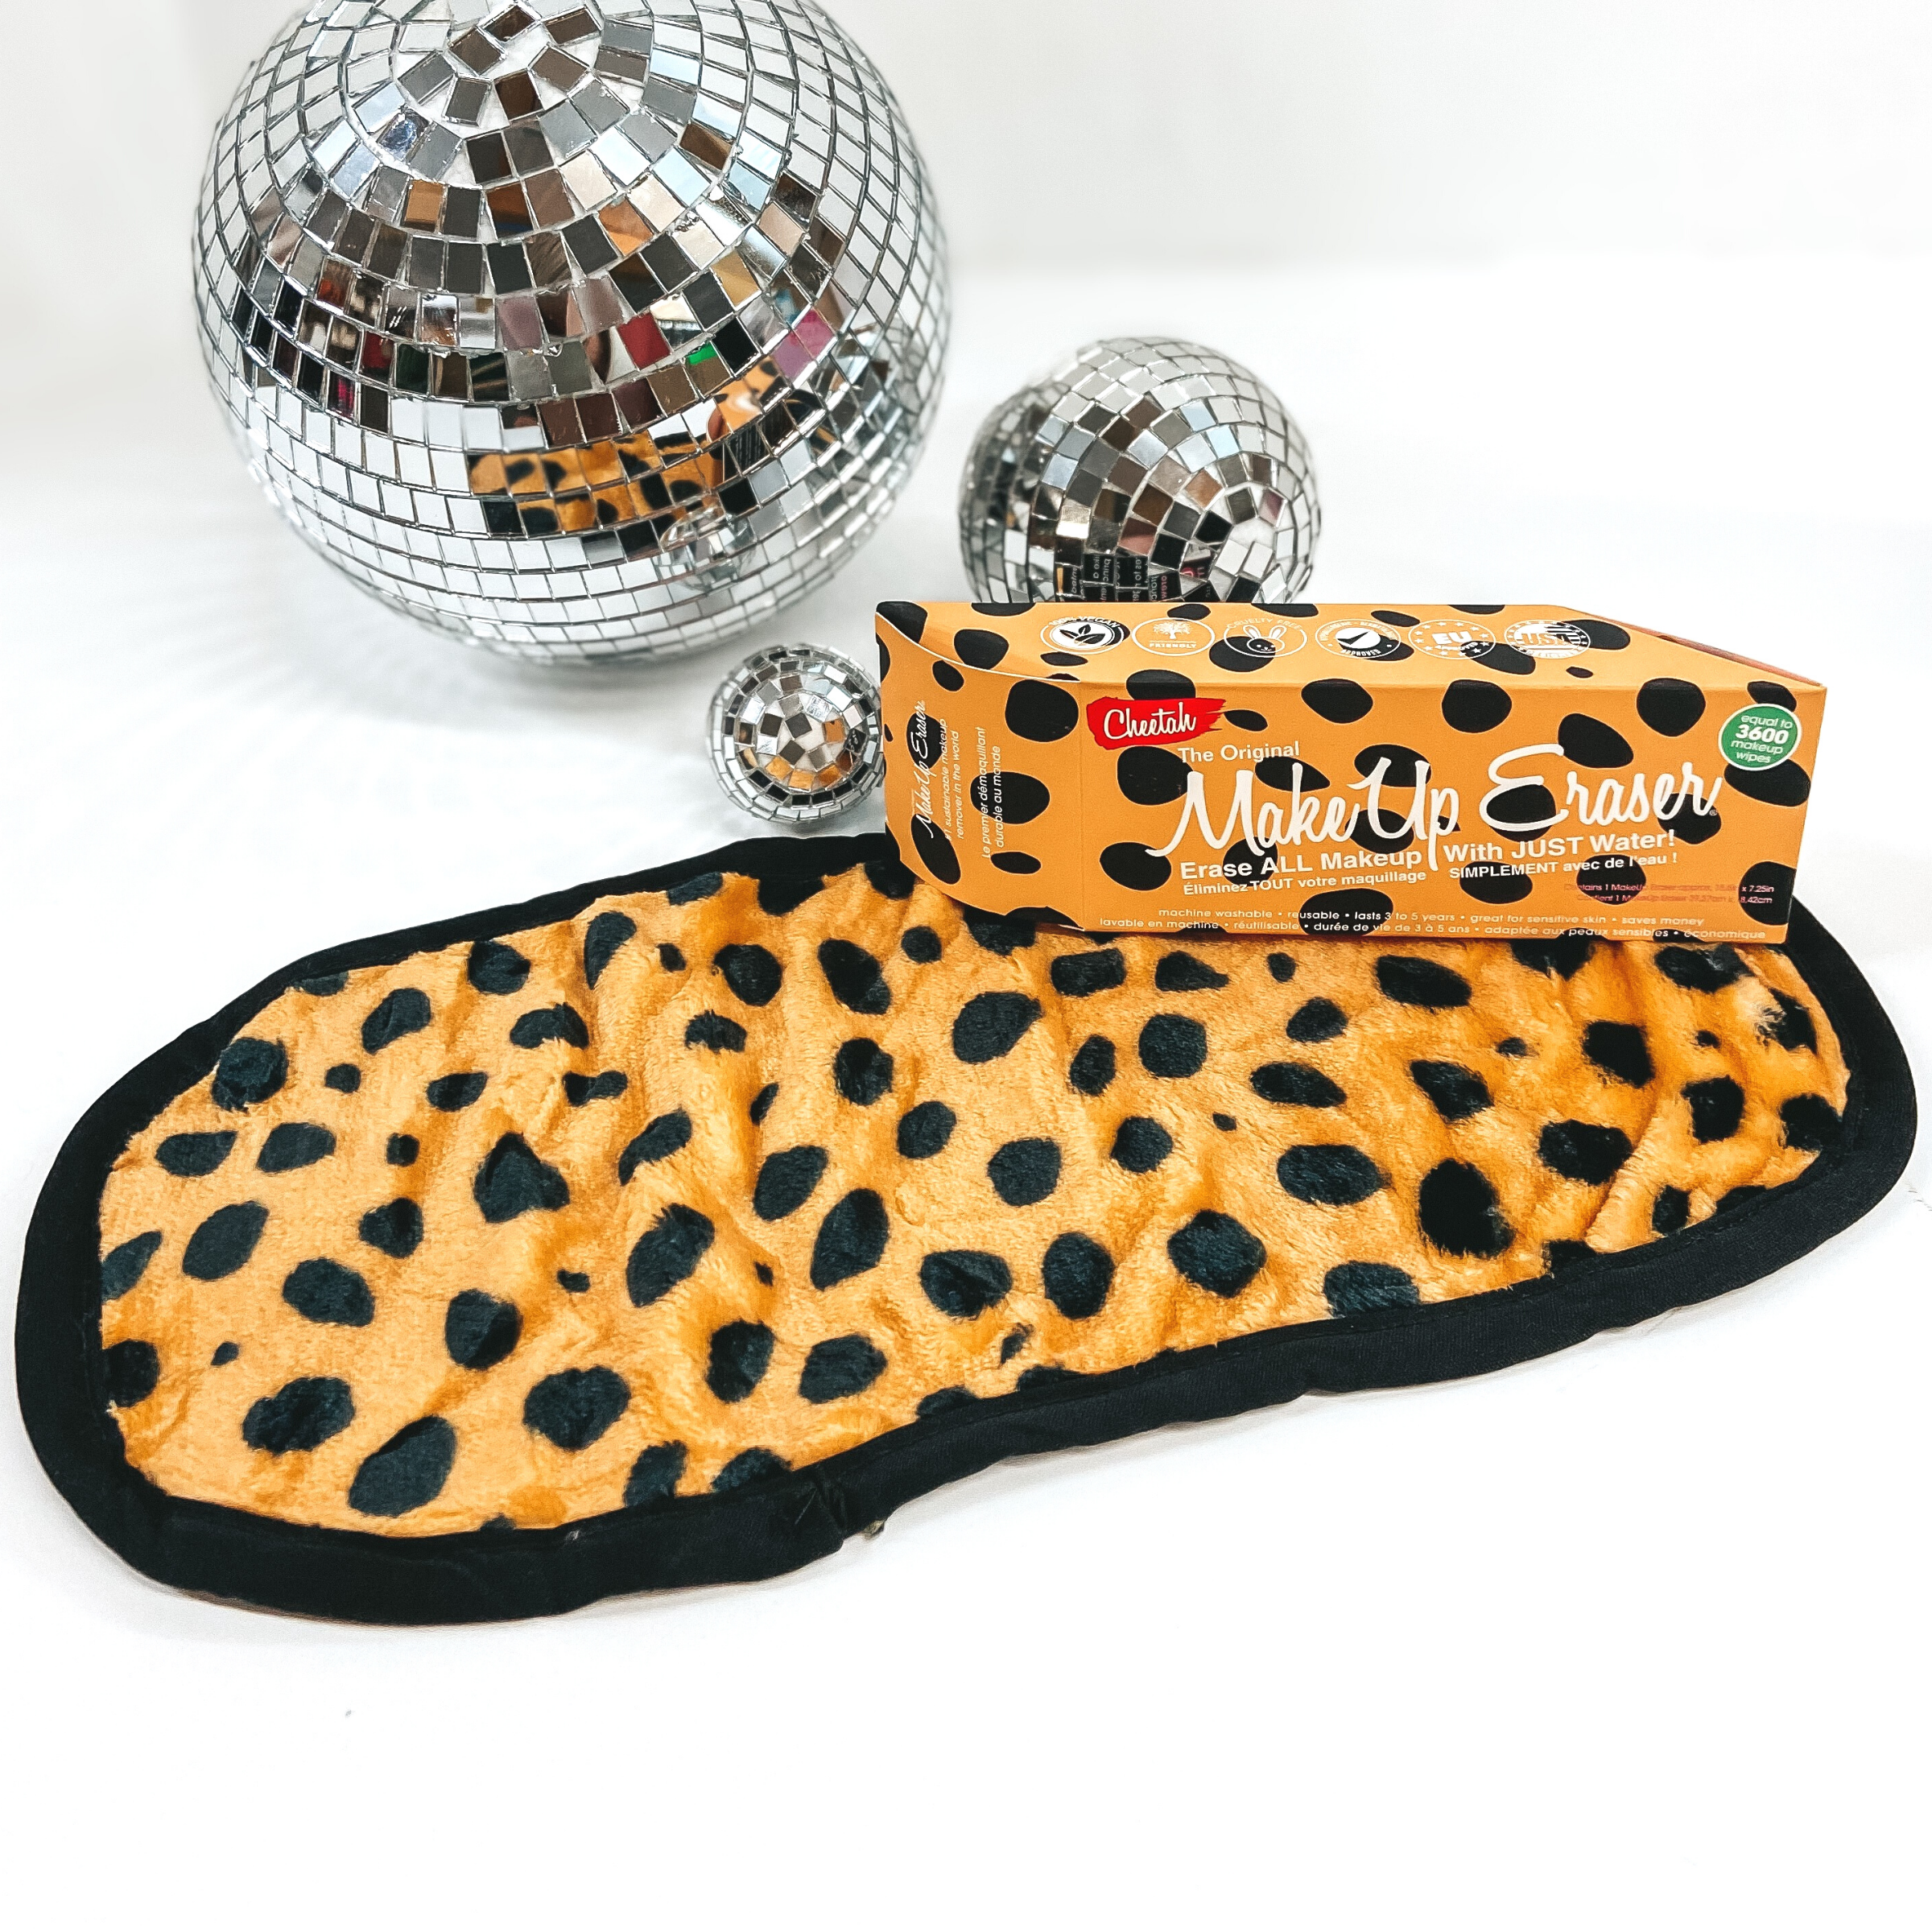 A cheetah print long, rounded rectangle cloth is pictured with a cheetah print box laying on one of the corners. This is pictured on a white background with a few disco balls in the top of the picture.